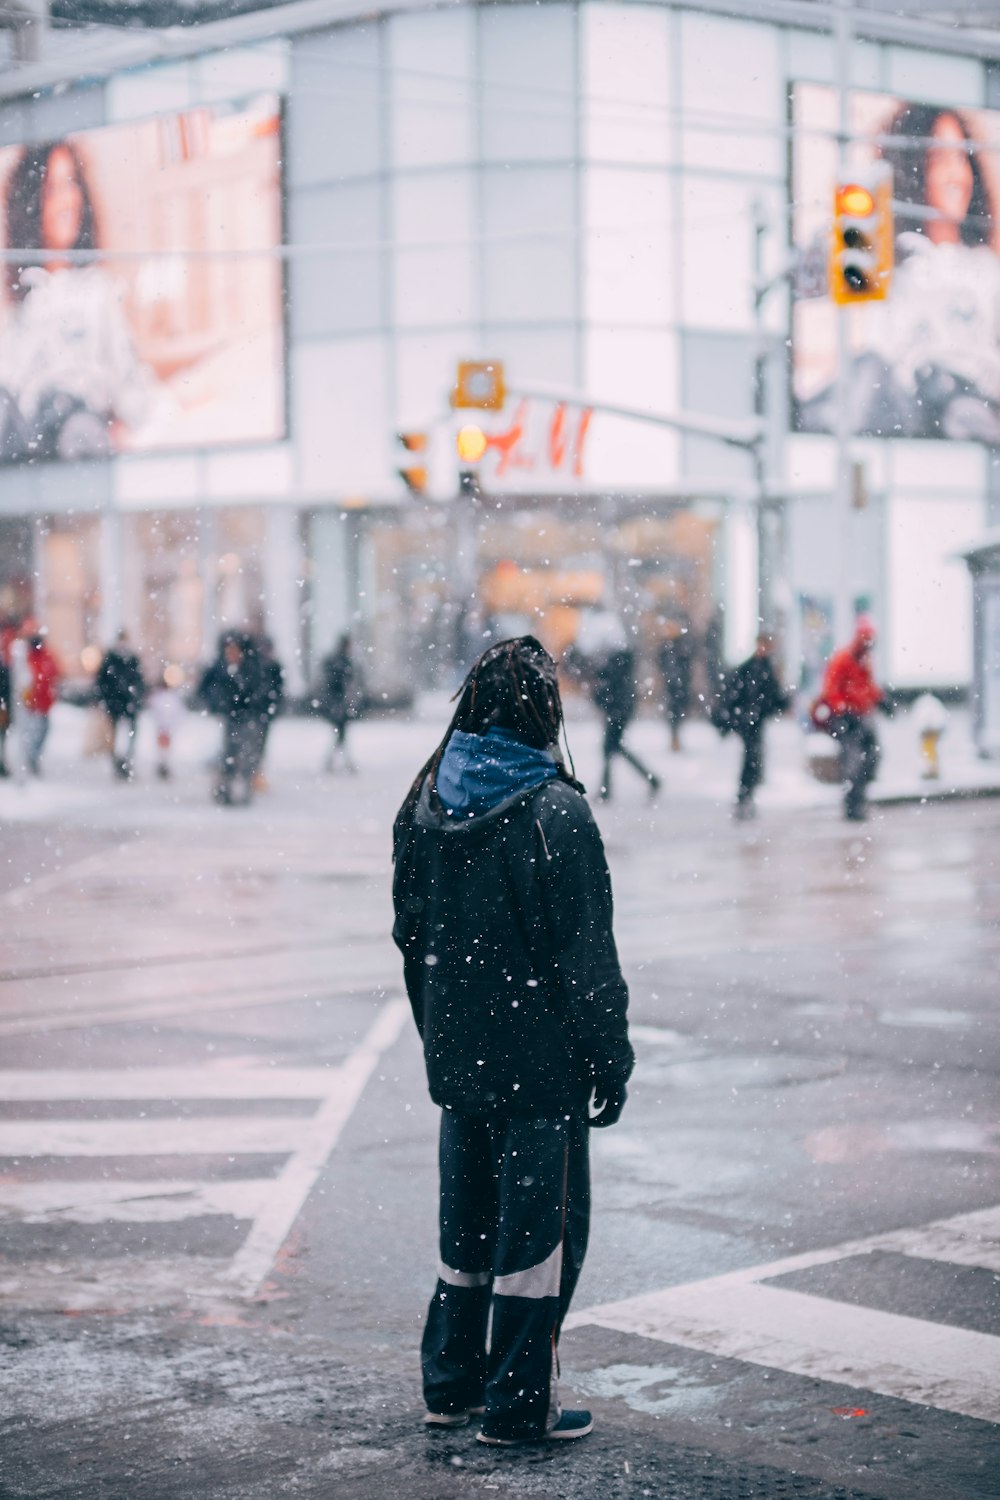 a person standing on a street corner in the snow